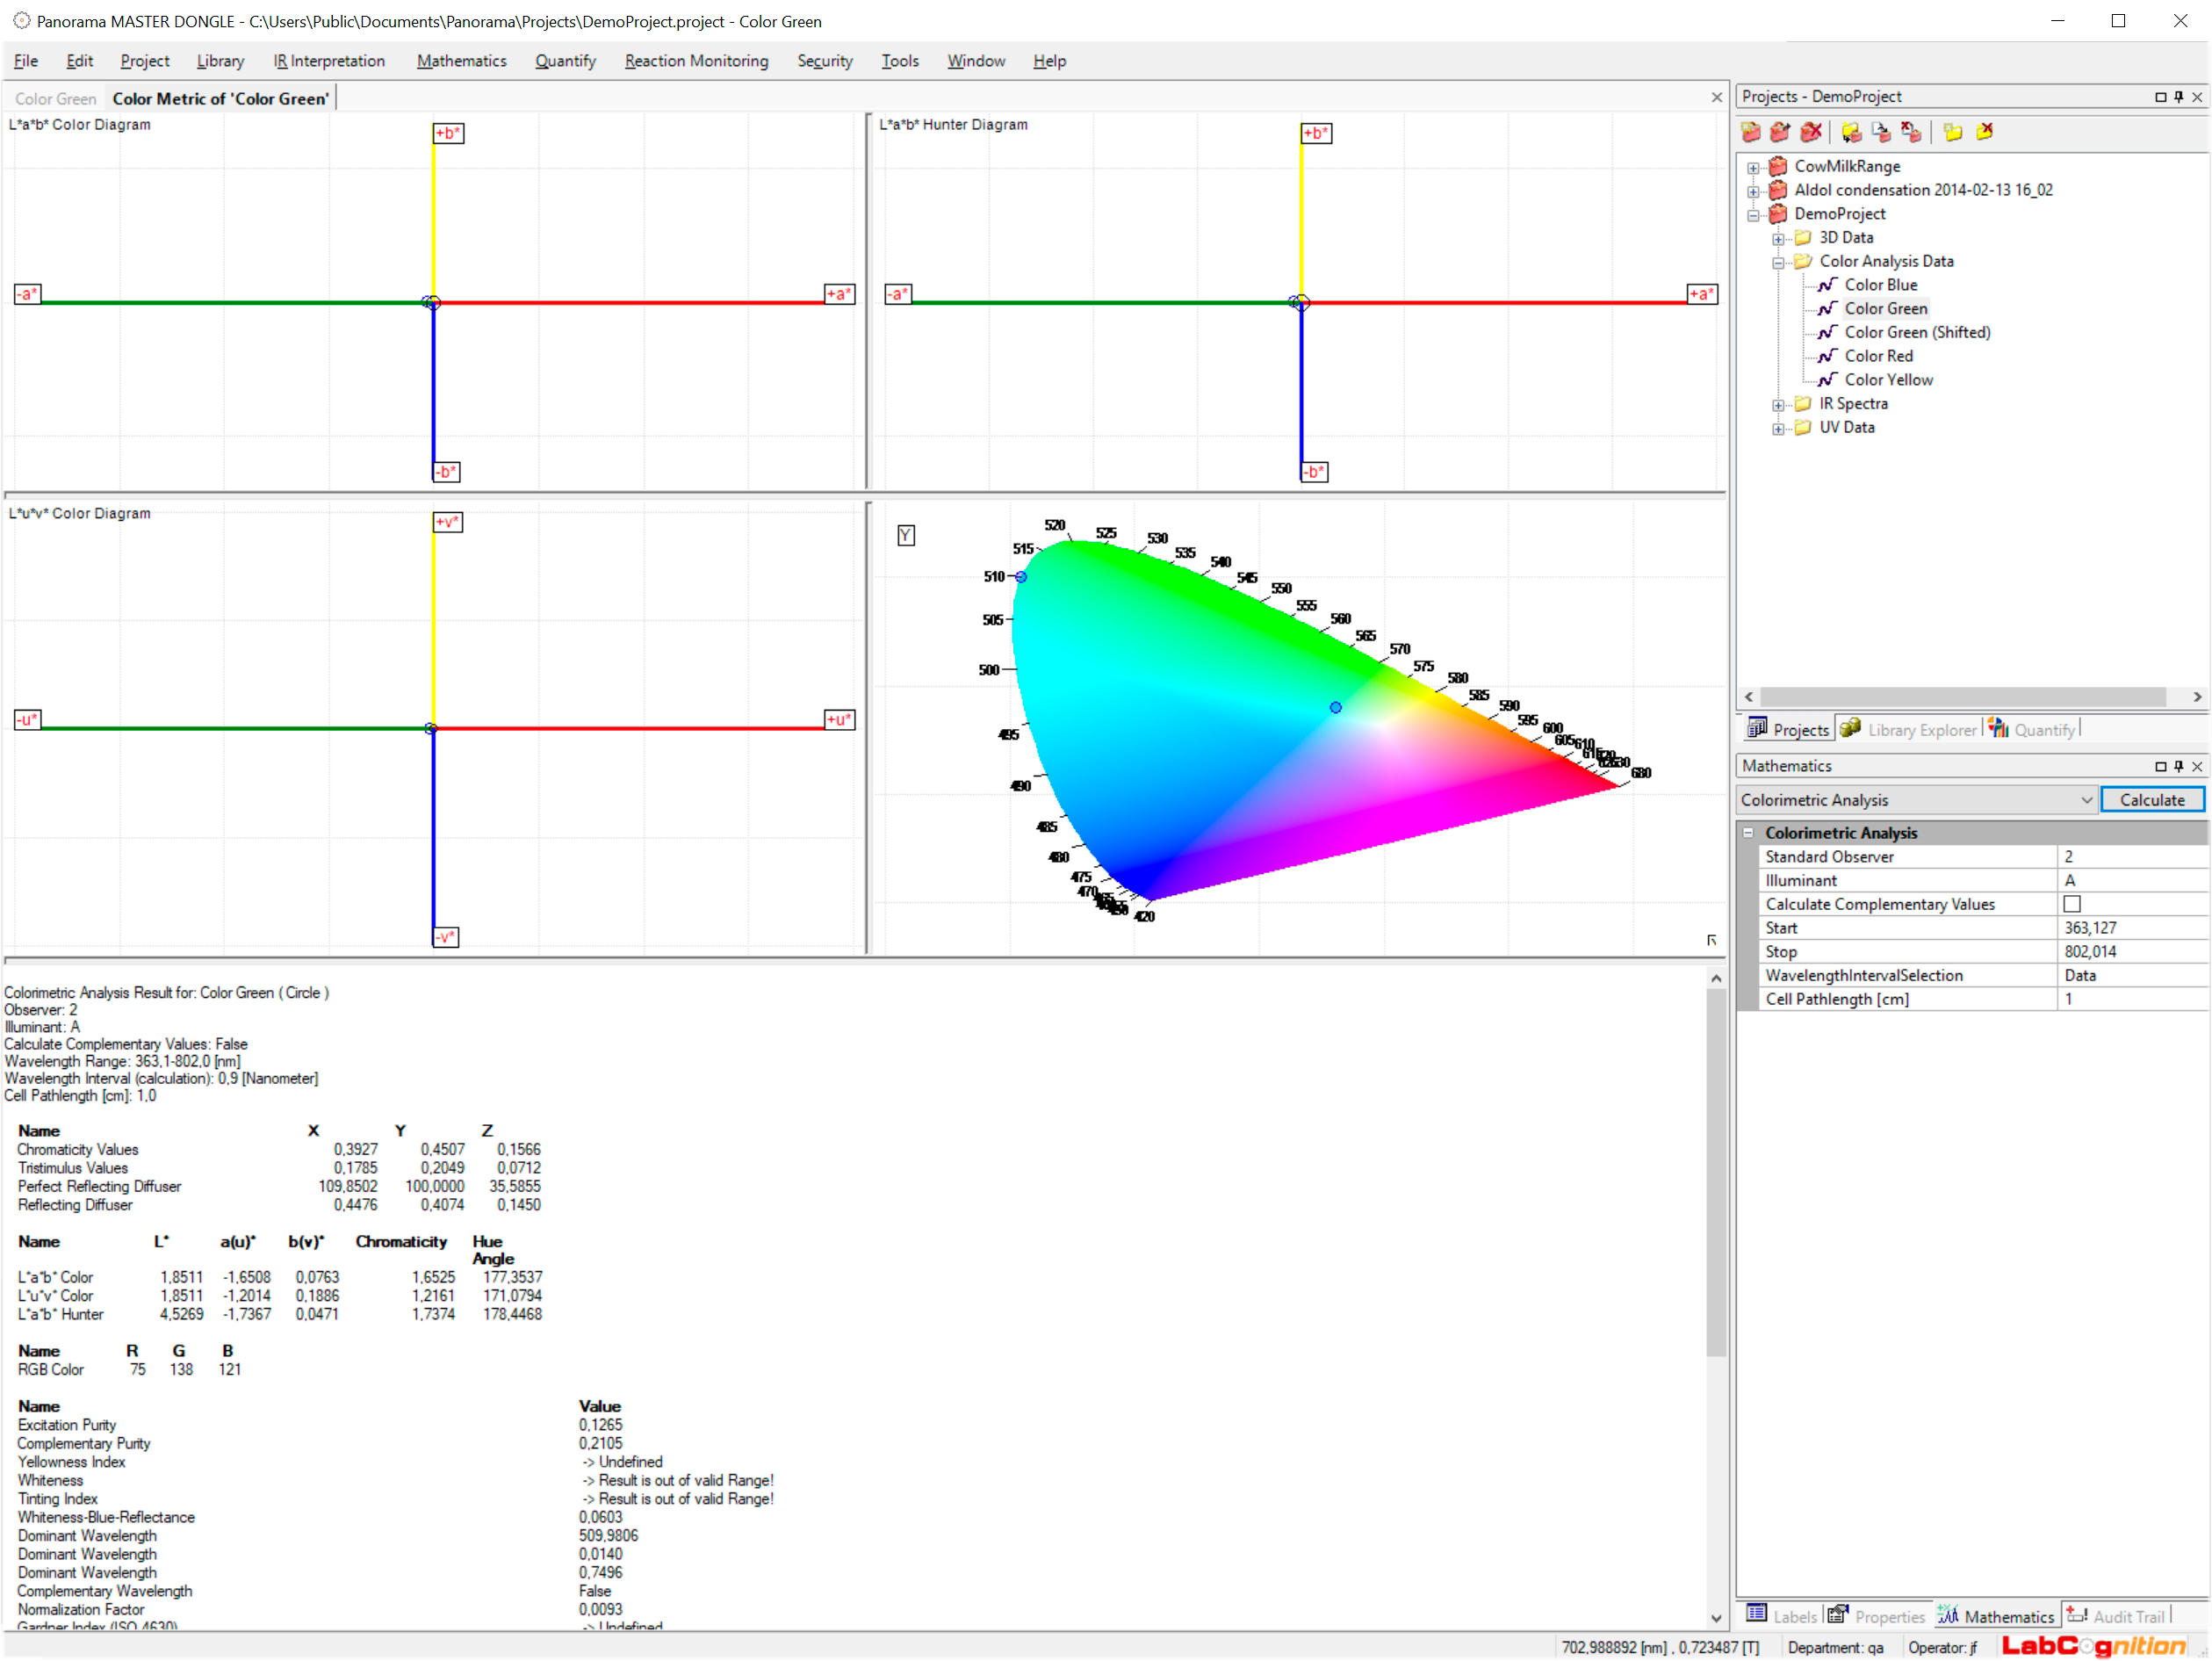 Software Interface shwoing add on module for color analysis